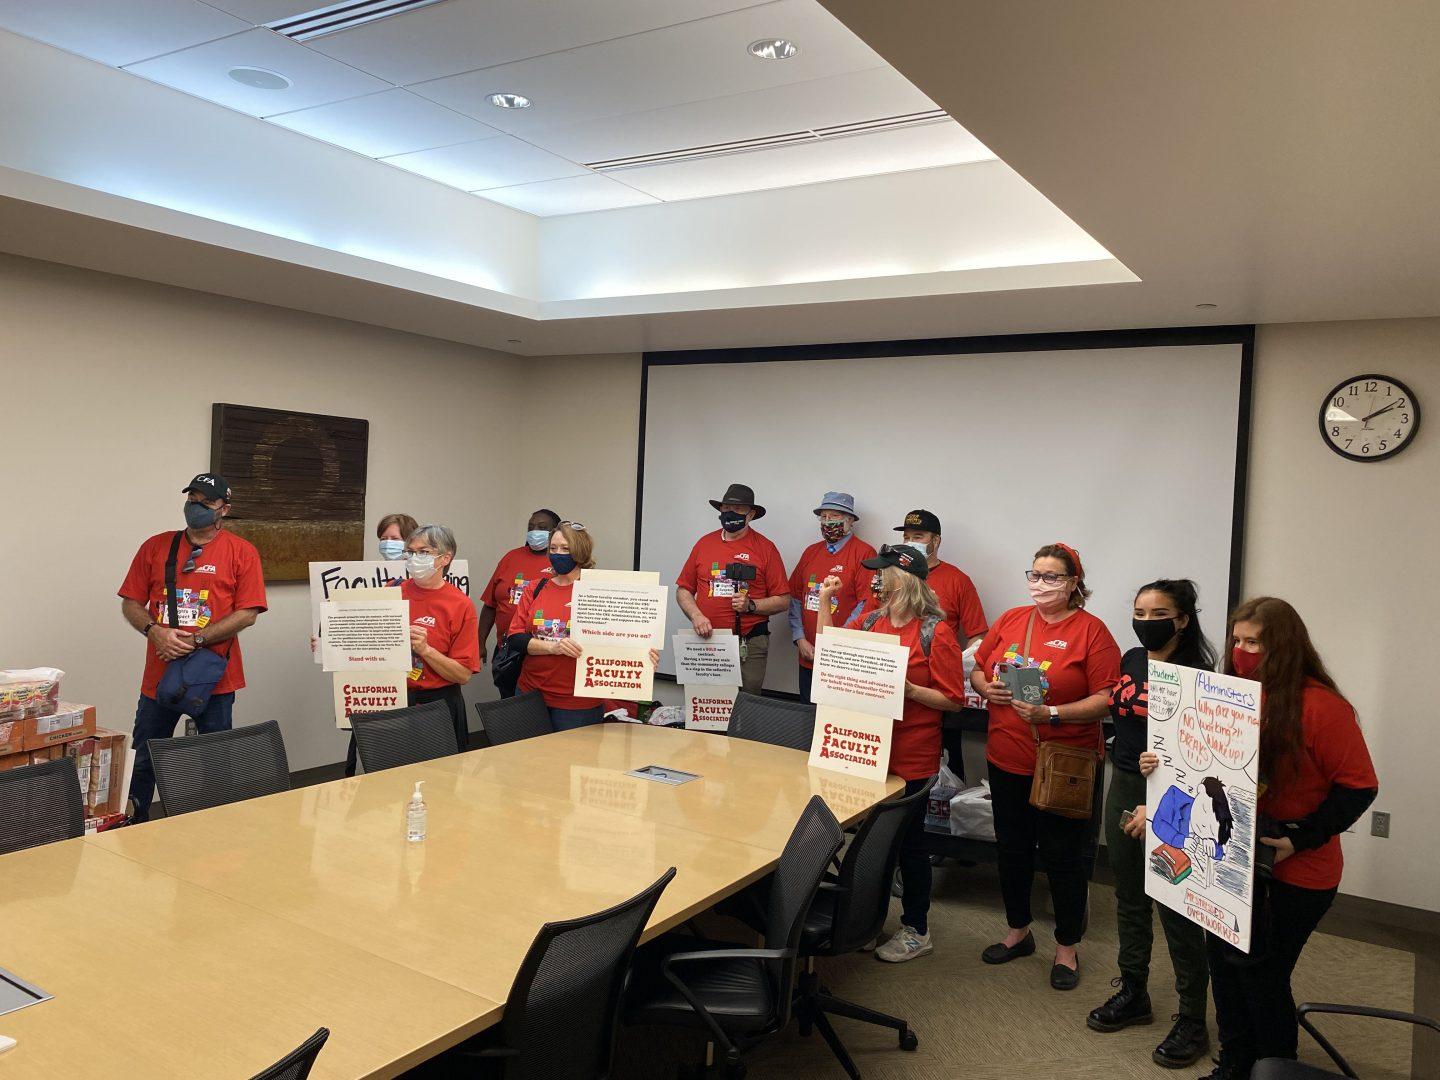 The Fresno chapter of the California Faculty Association (CFA) met with President SaÃºl JimÃ©nez-Sandoval, demanding that he support faculty efforts to obtain fair contract. The CFA and the CSU are currently at an impasse in the bargaining process. (Adam Ricardo Solis/The Collegian)